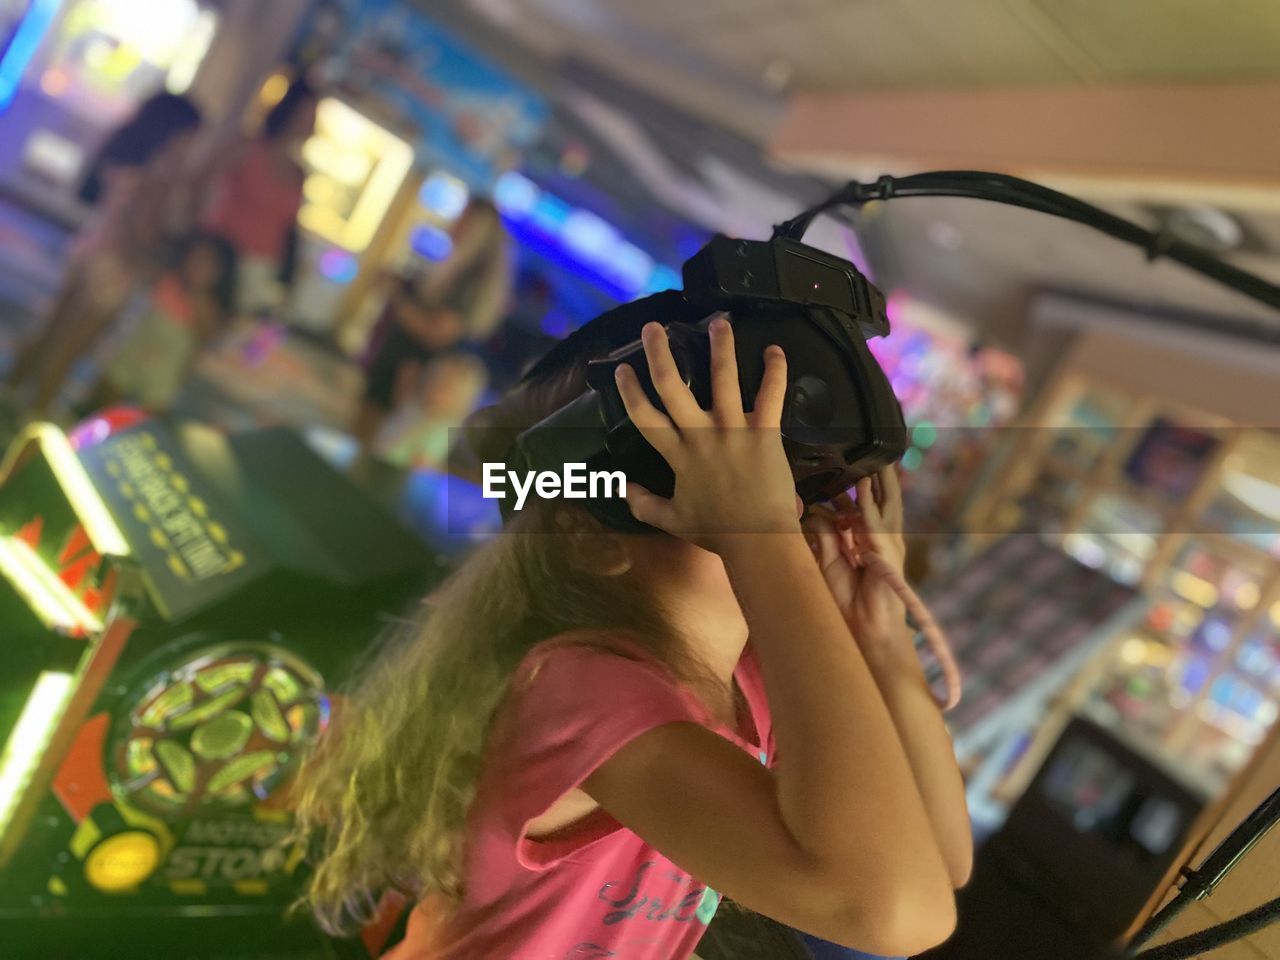 A girl is playing virtual games holding a camera on her head by hands